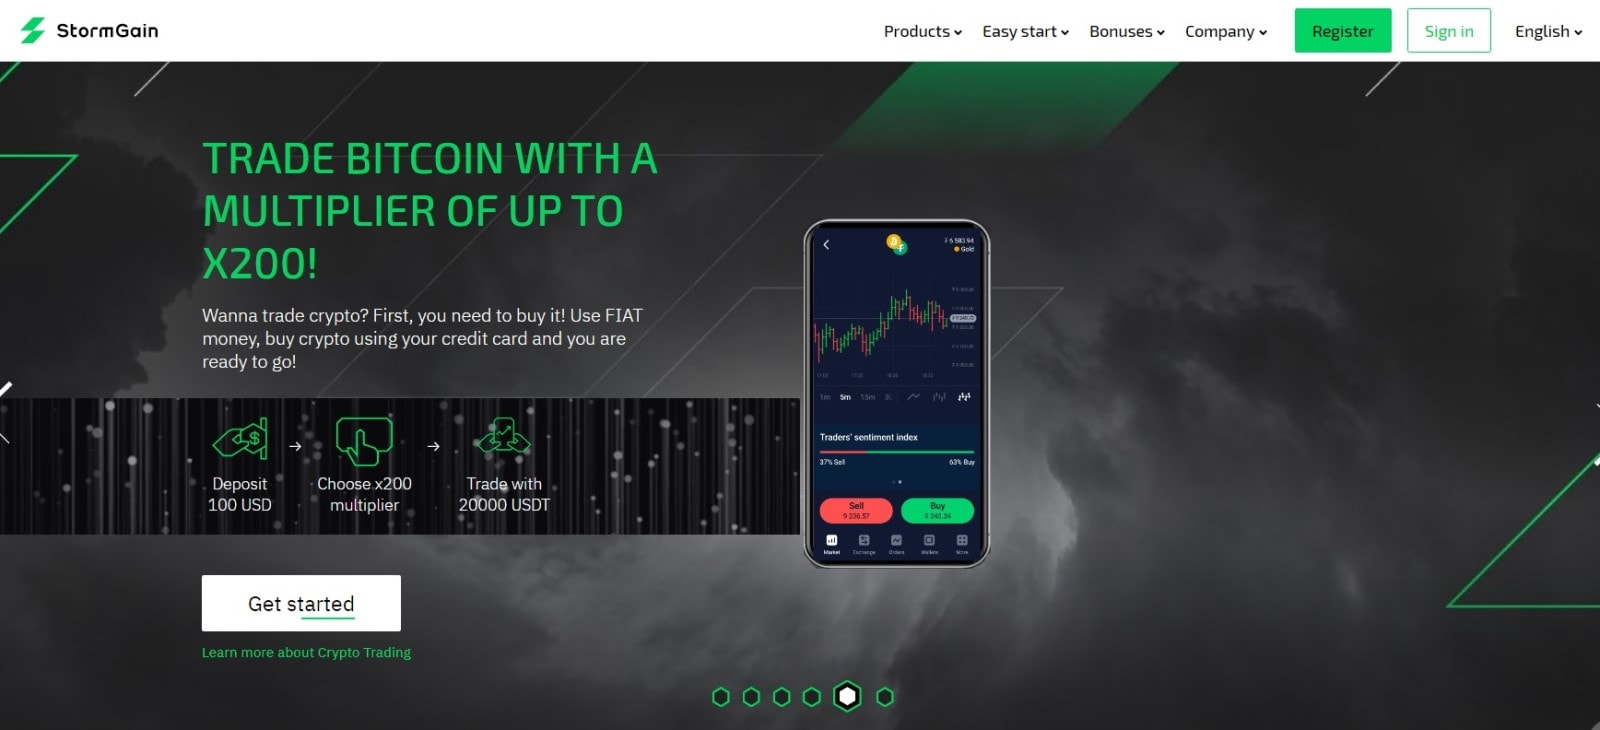 The StormGain cryptocurrency exchange offers Bitcoin trading with leverage of up to x200.